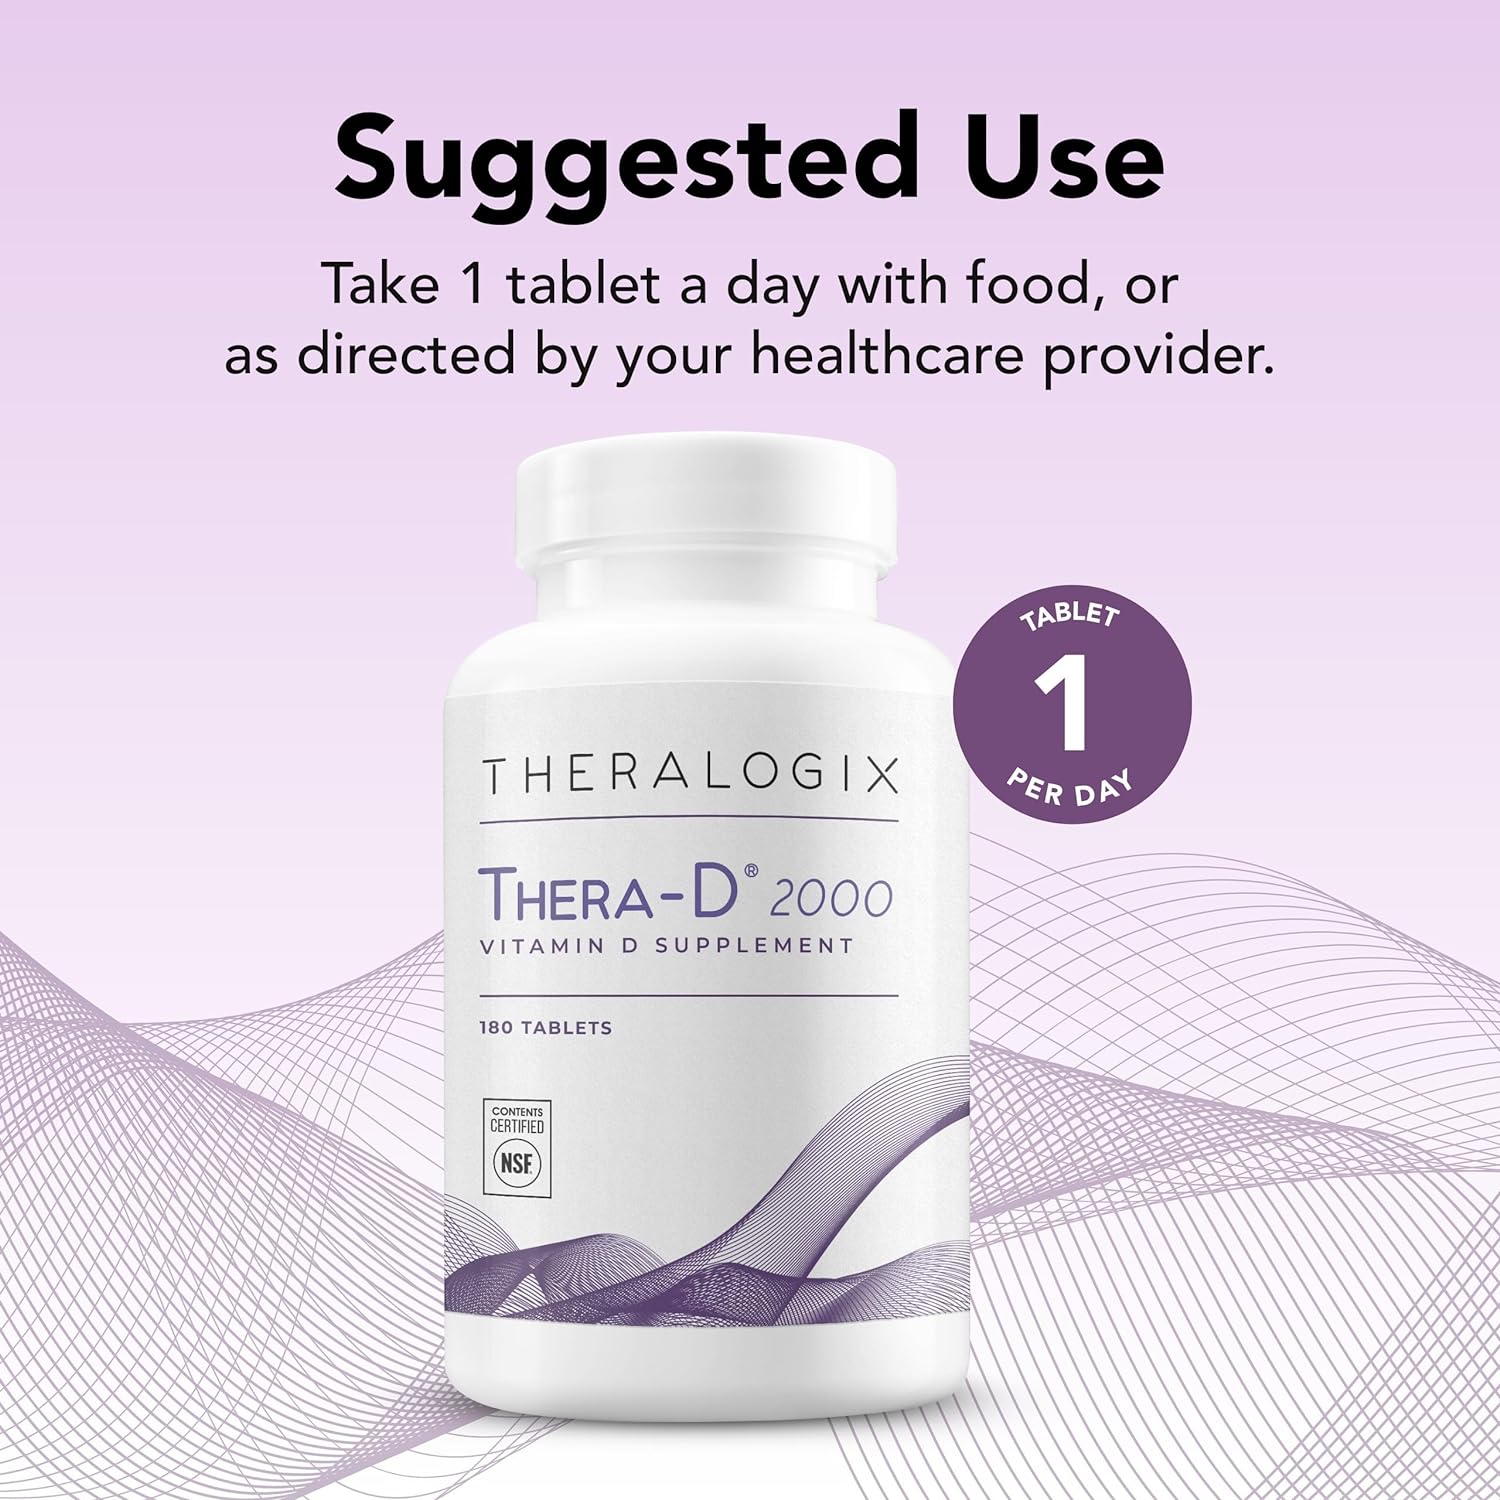 Theralogix Thera-D 2000 Vitamin D Supplement - 2,000IU (50 mcg) Vitamin D3 Tablets - 180-Day Supply - Immune Support Supplement for Women & Men - Aids Bone & Heart Health - NSF Certified - 180 Tablets : Health & Household